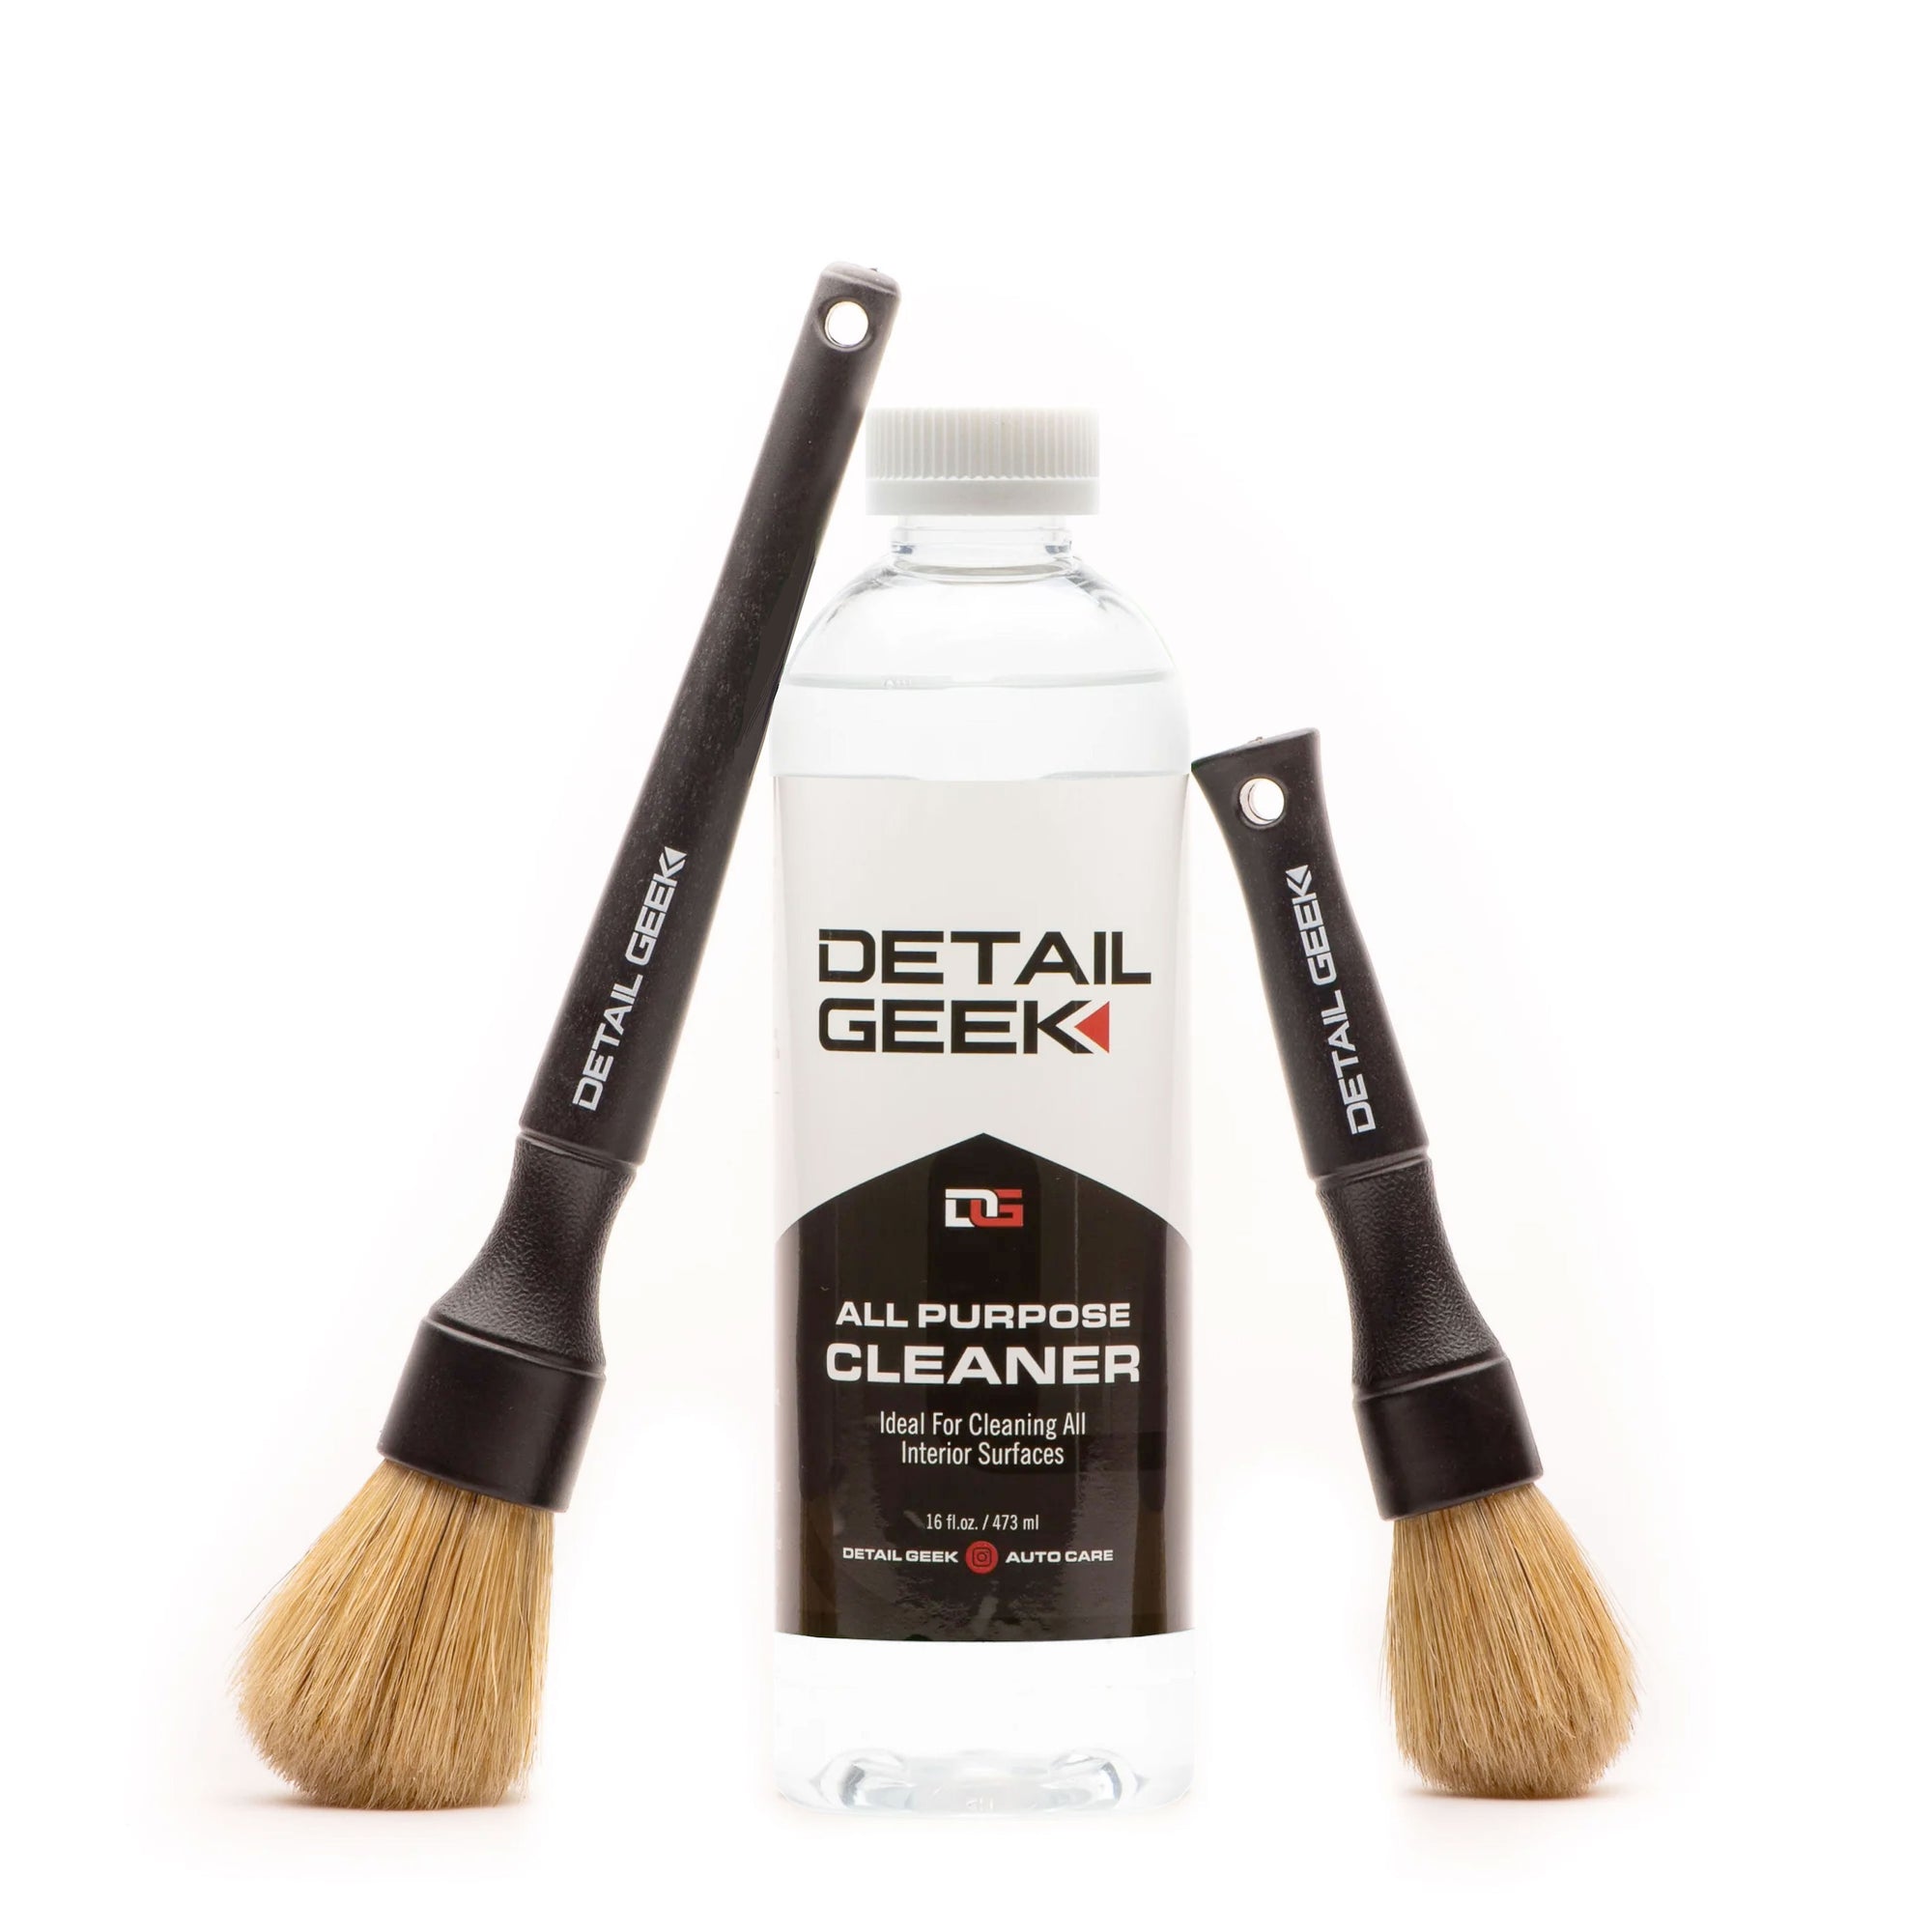 16oz Brush Cleaner, Restorer, Clean Dried Paint Brushes